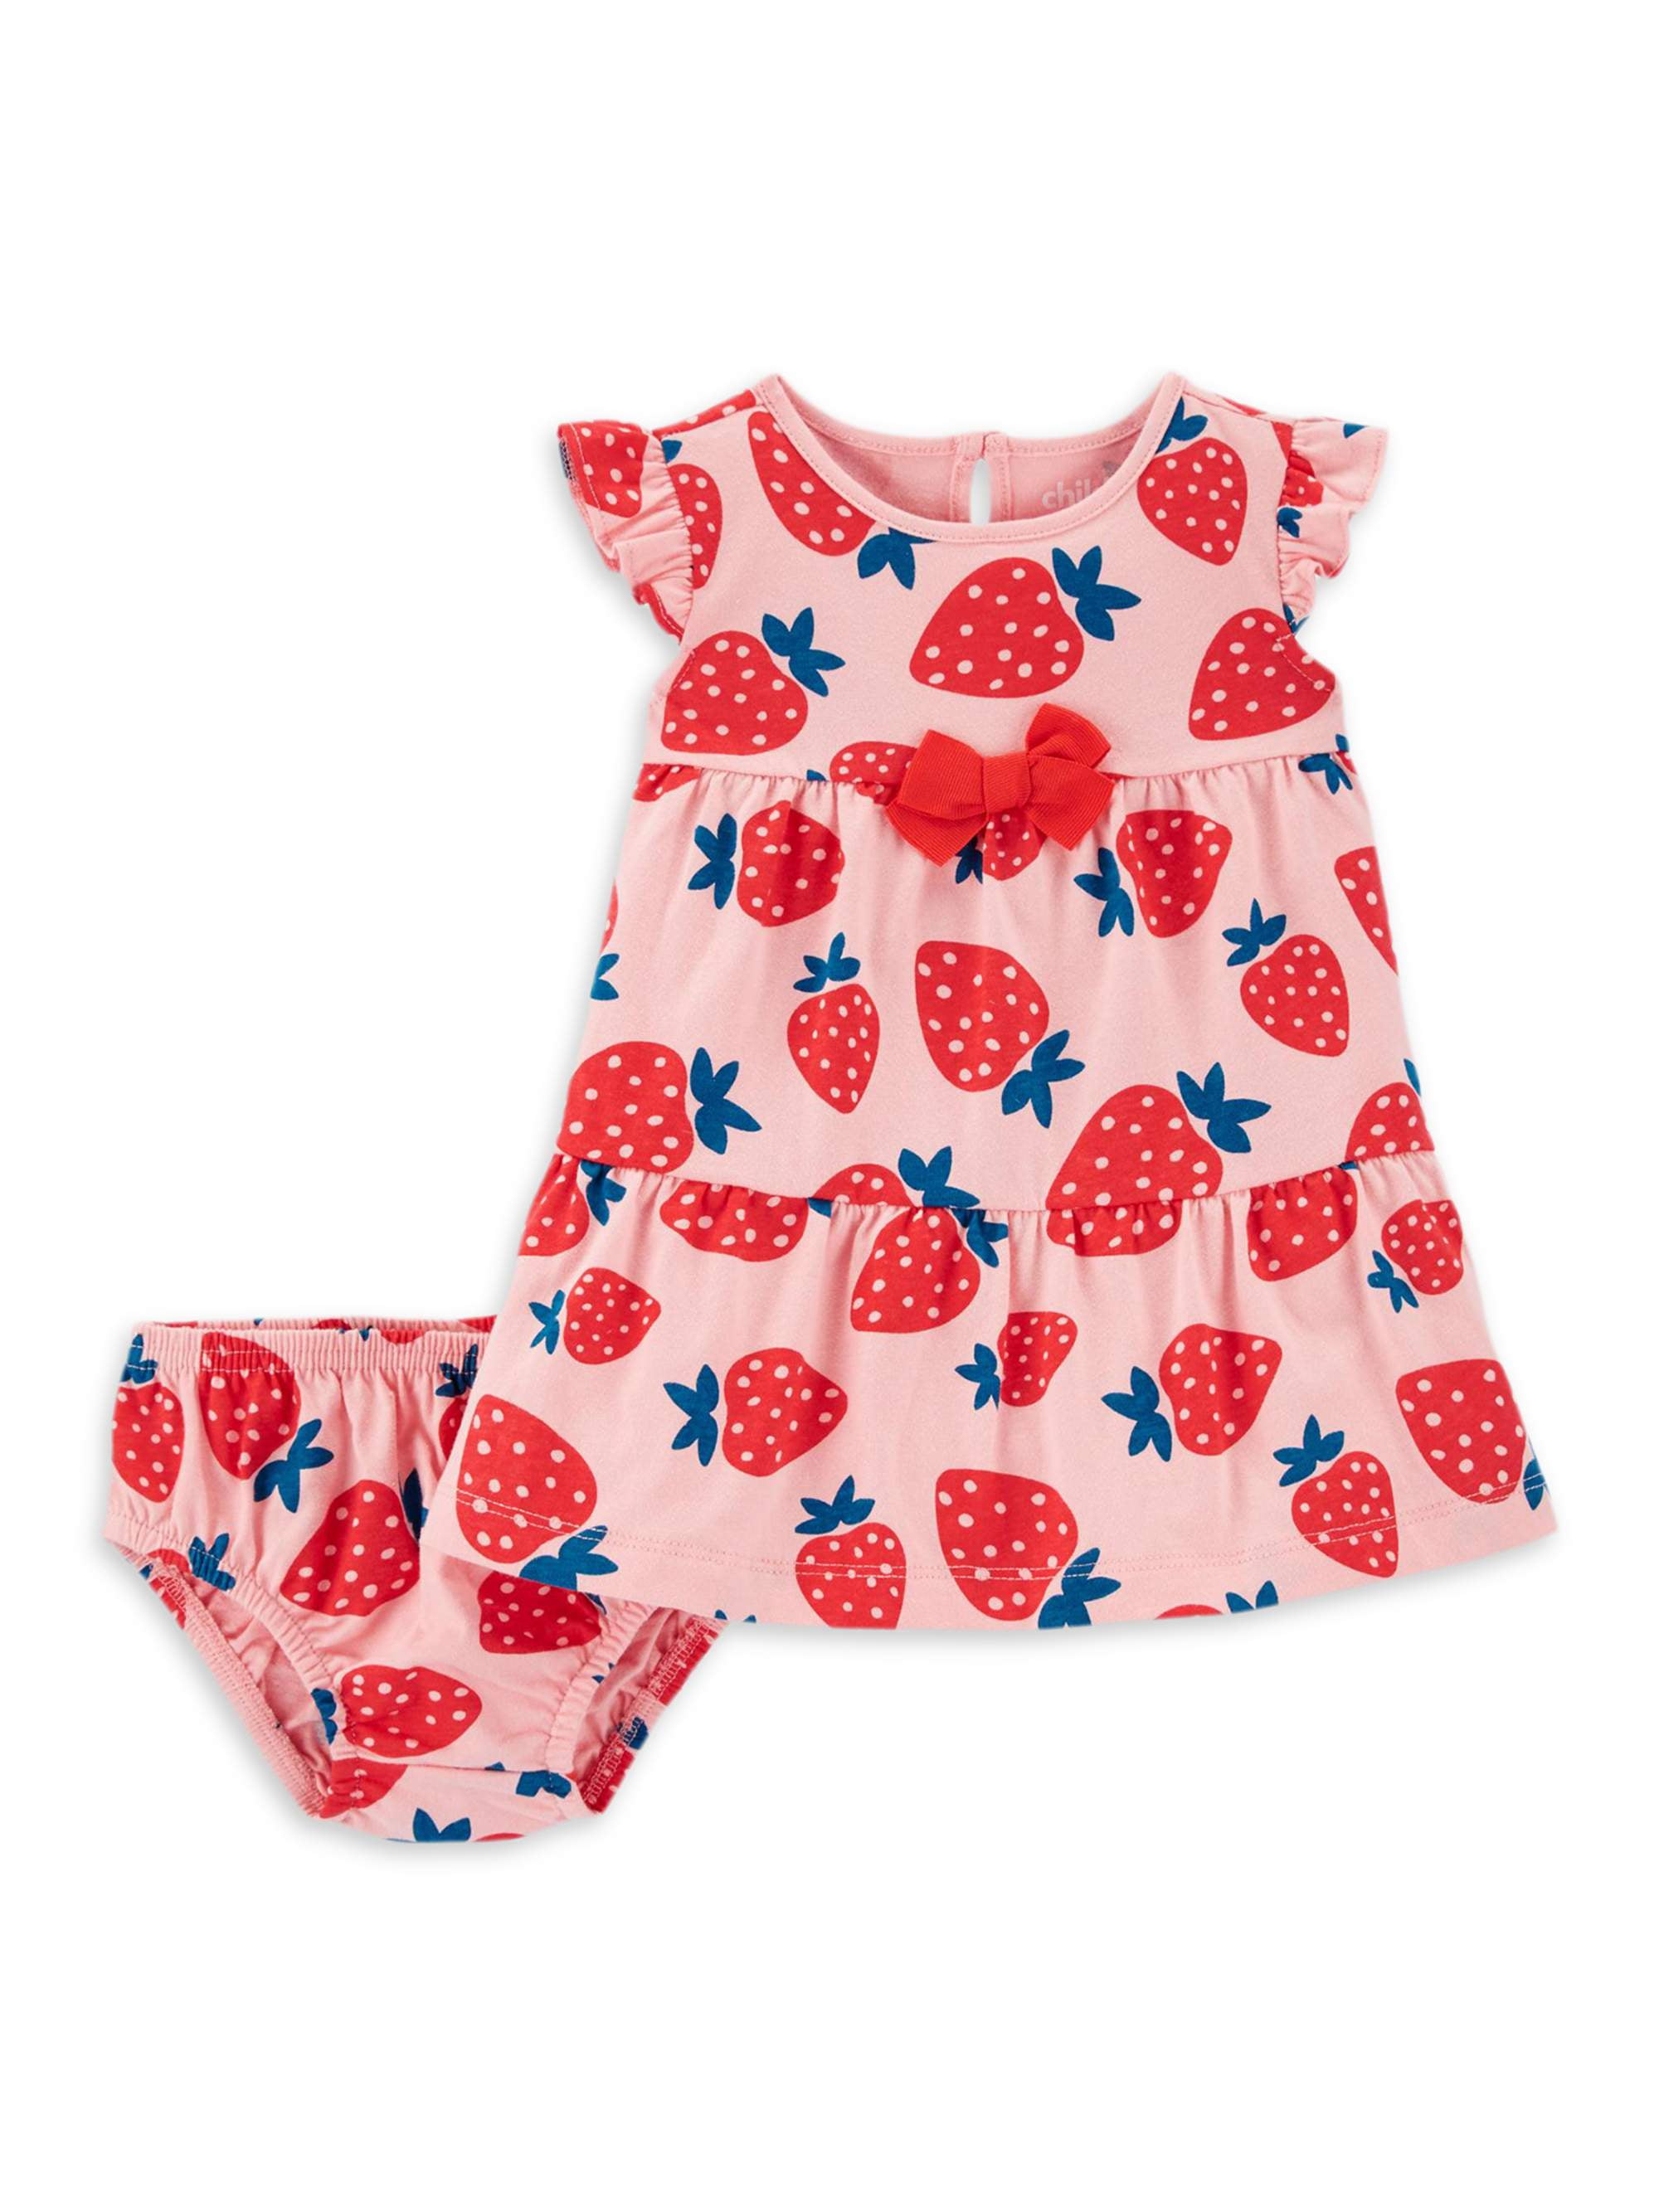 strawberry baby costume carters